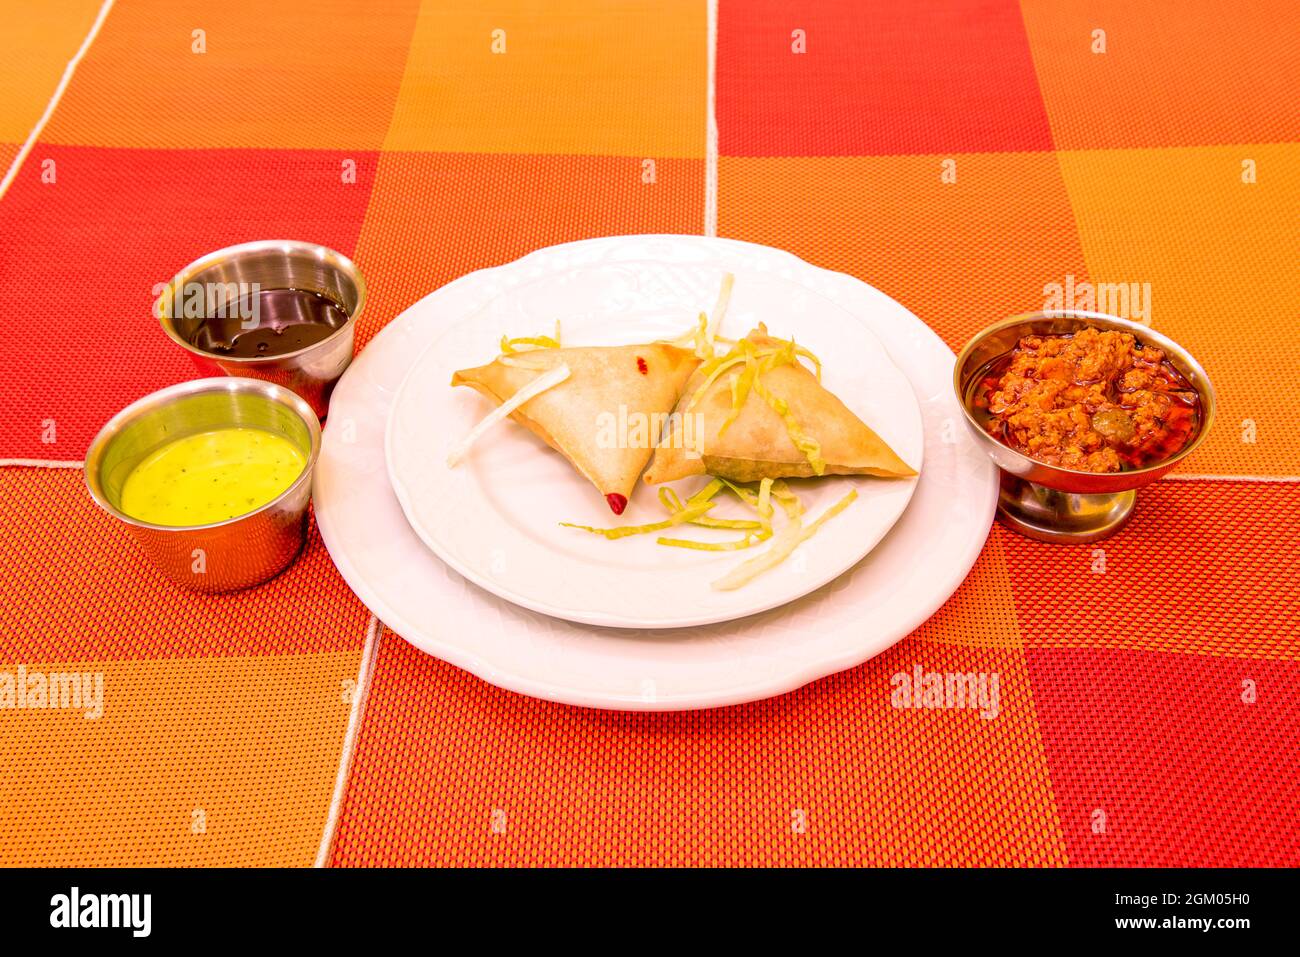 two vegetable samosas served in a Pakistani restaurant with sauces on an orange tablecloth Stock Photo